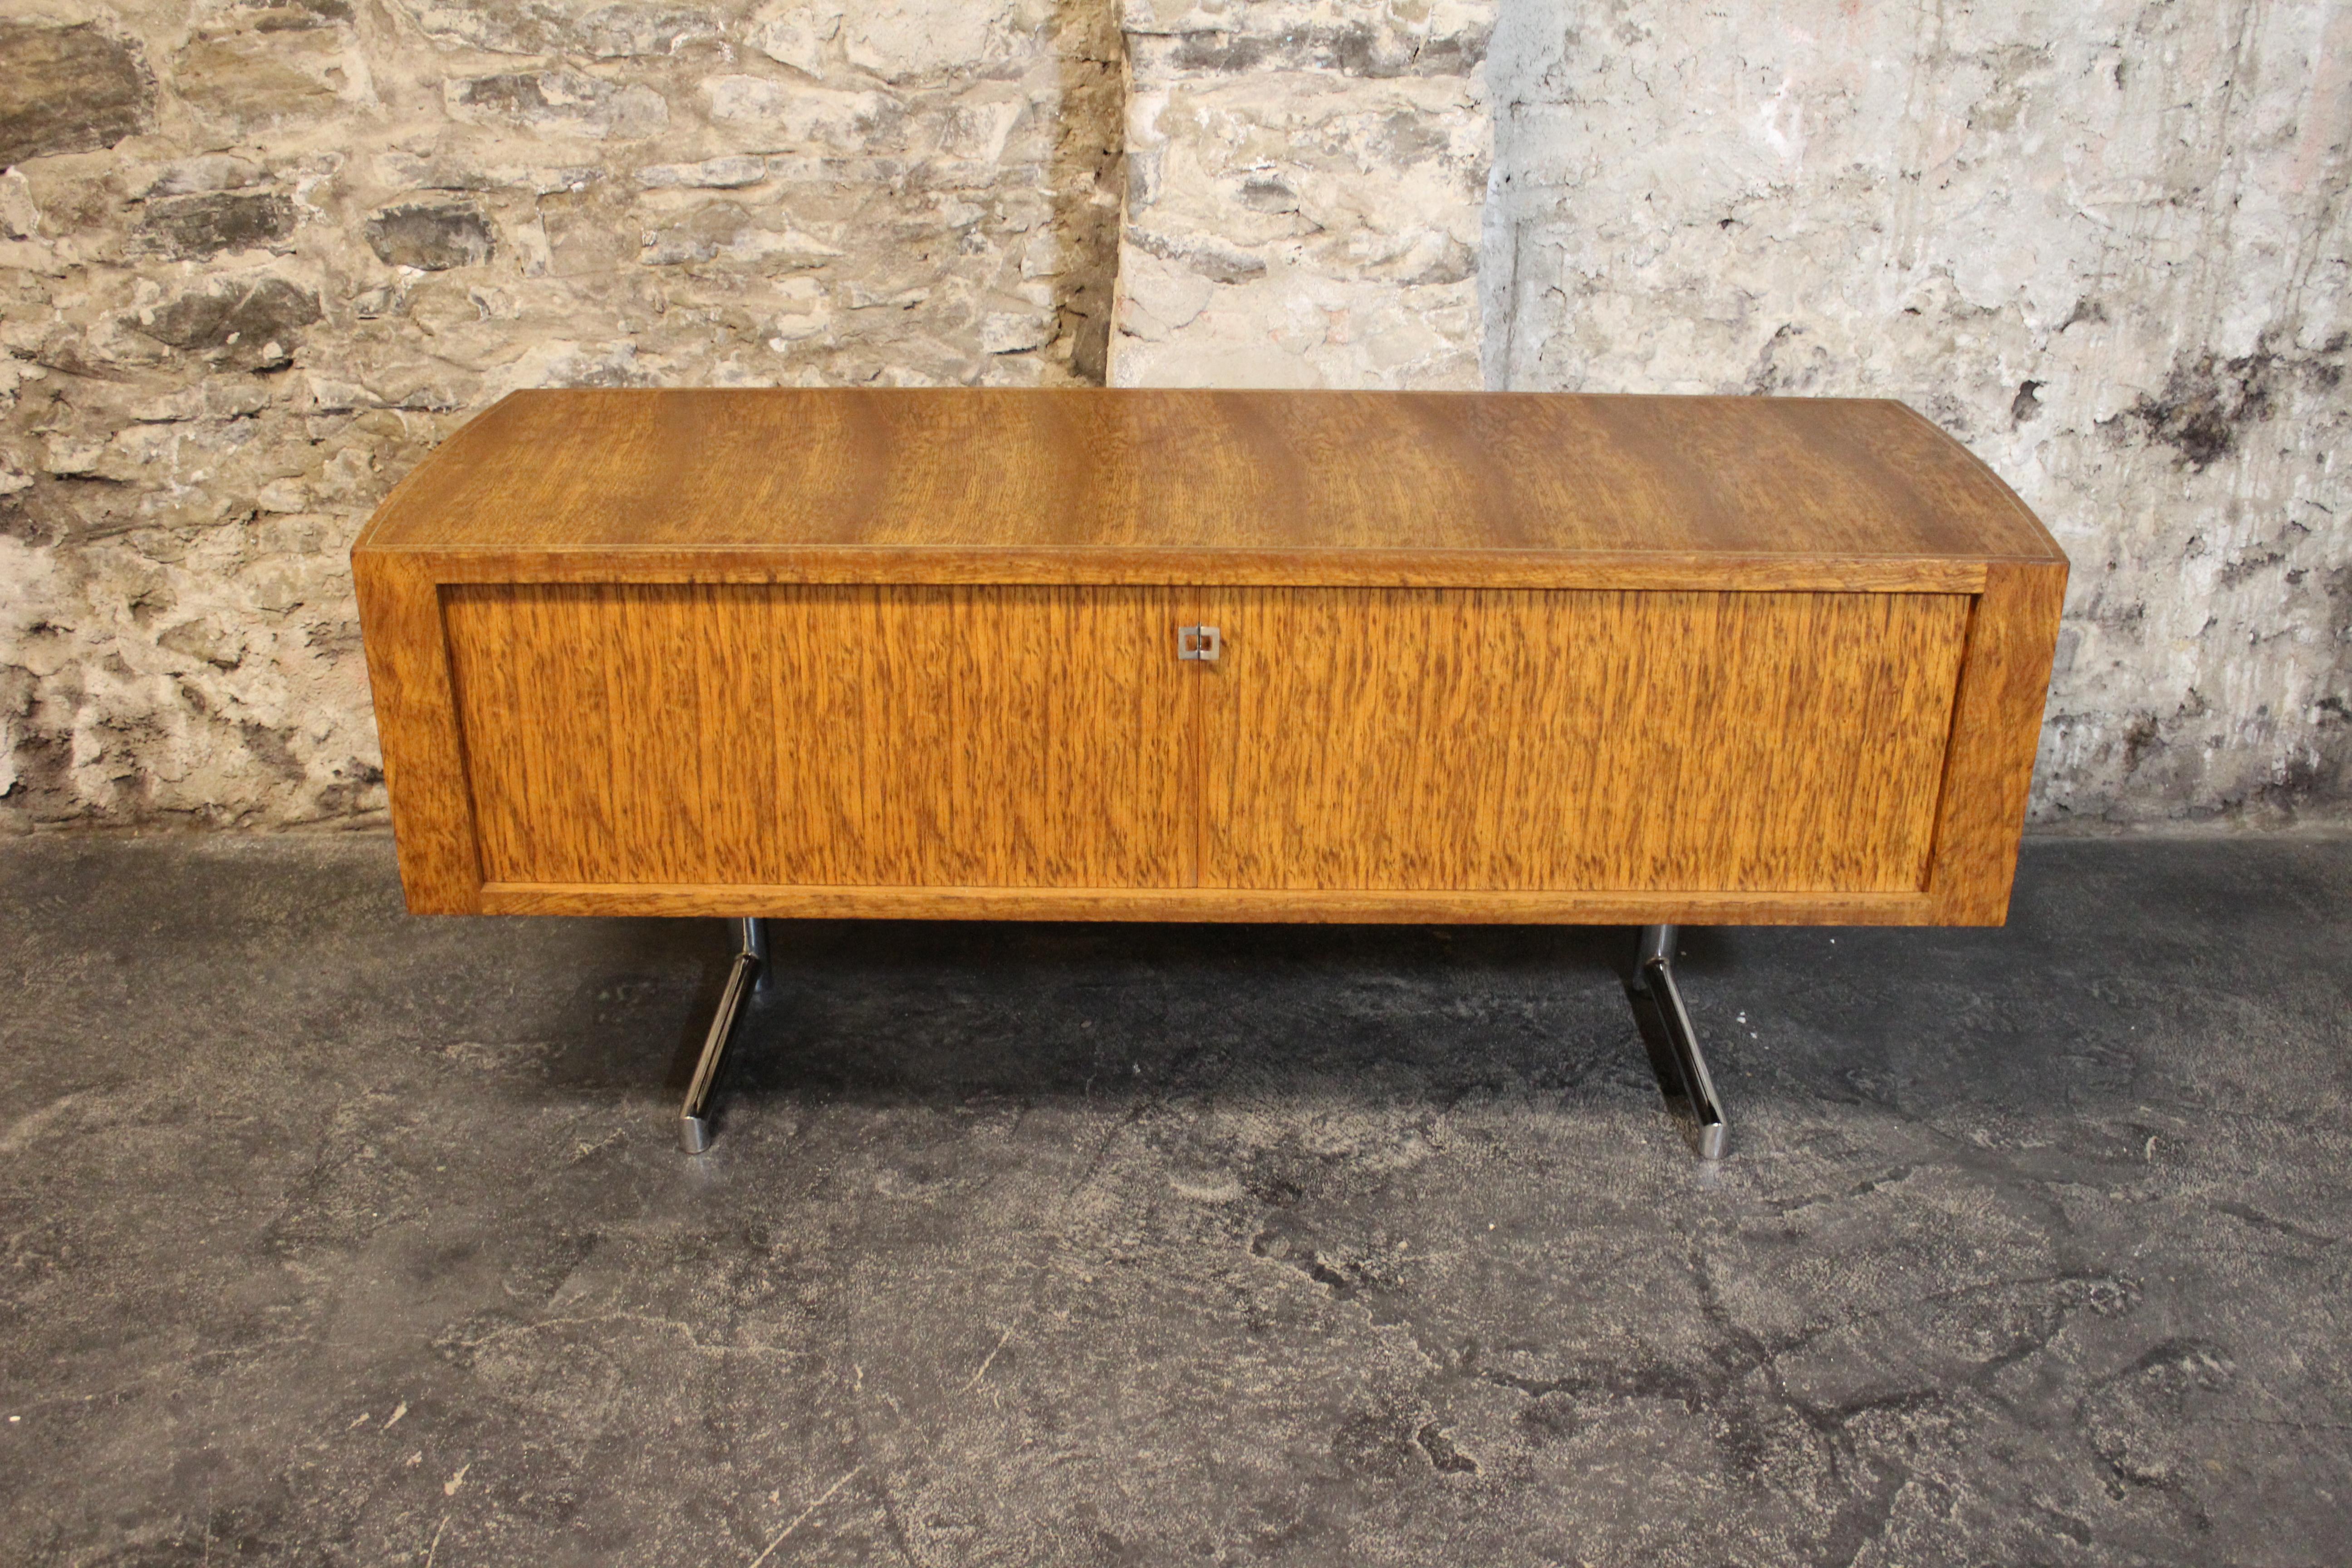 Rare Mid-Century Modern Leif Jacobsen executive credenza, circa 1970. This high quality constructed credenza features beautiful exotic wood grain, tambour doors, a finished back, chrome cantilevered legs, and inset chrome banding on the top. Leif